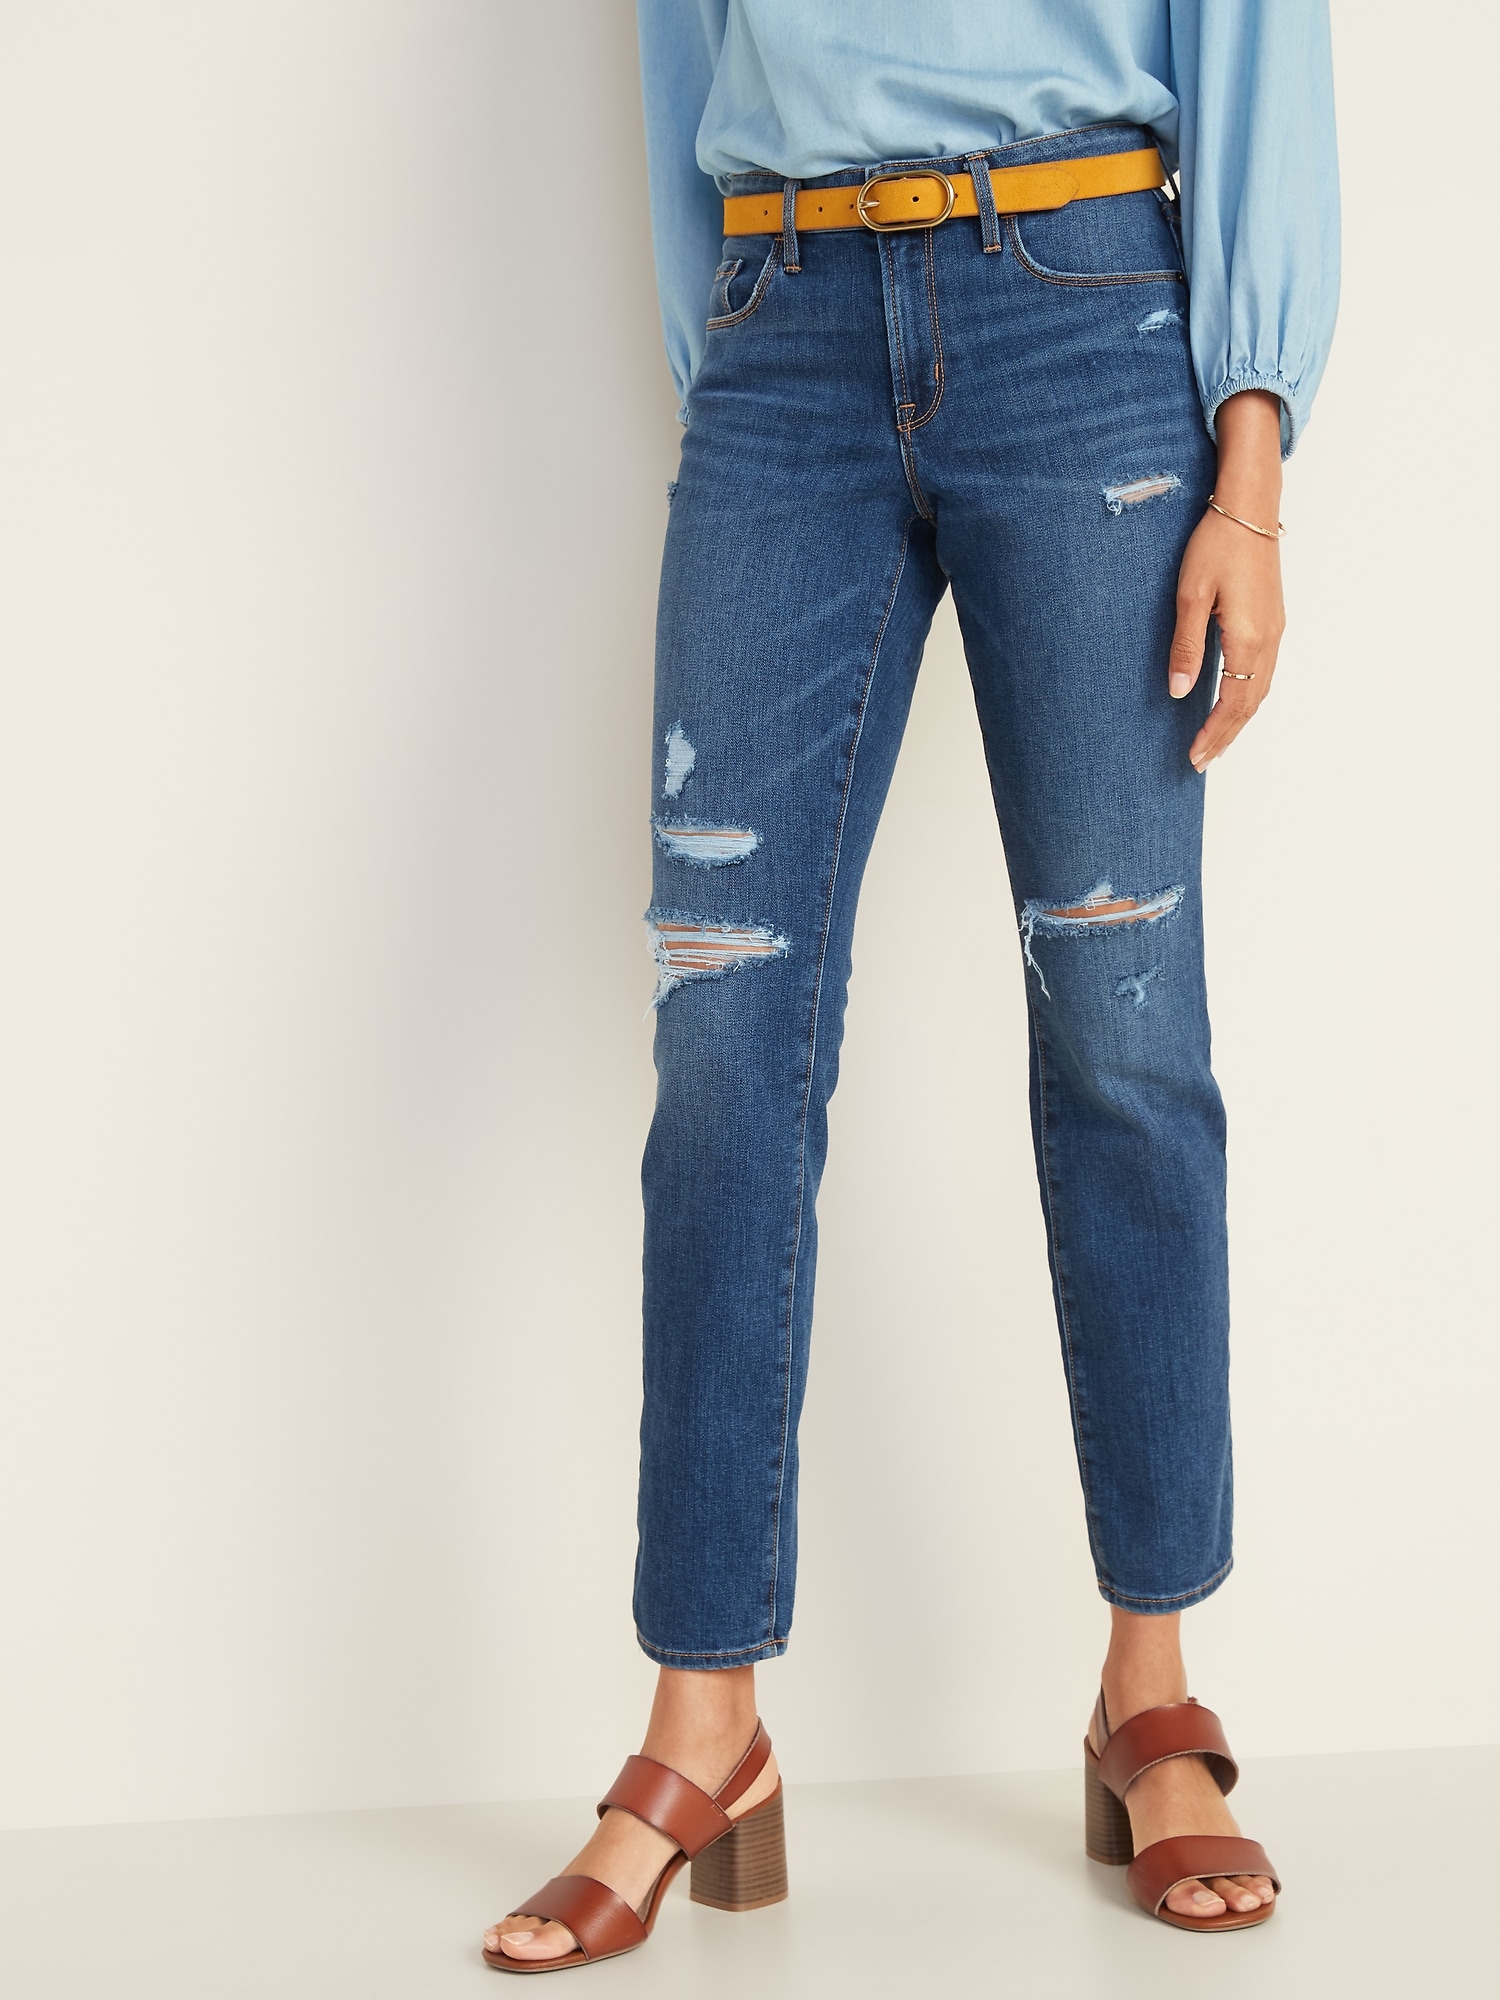 old navy cut up jeans